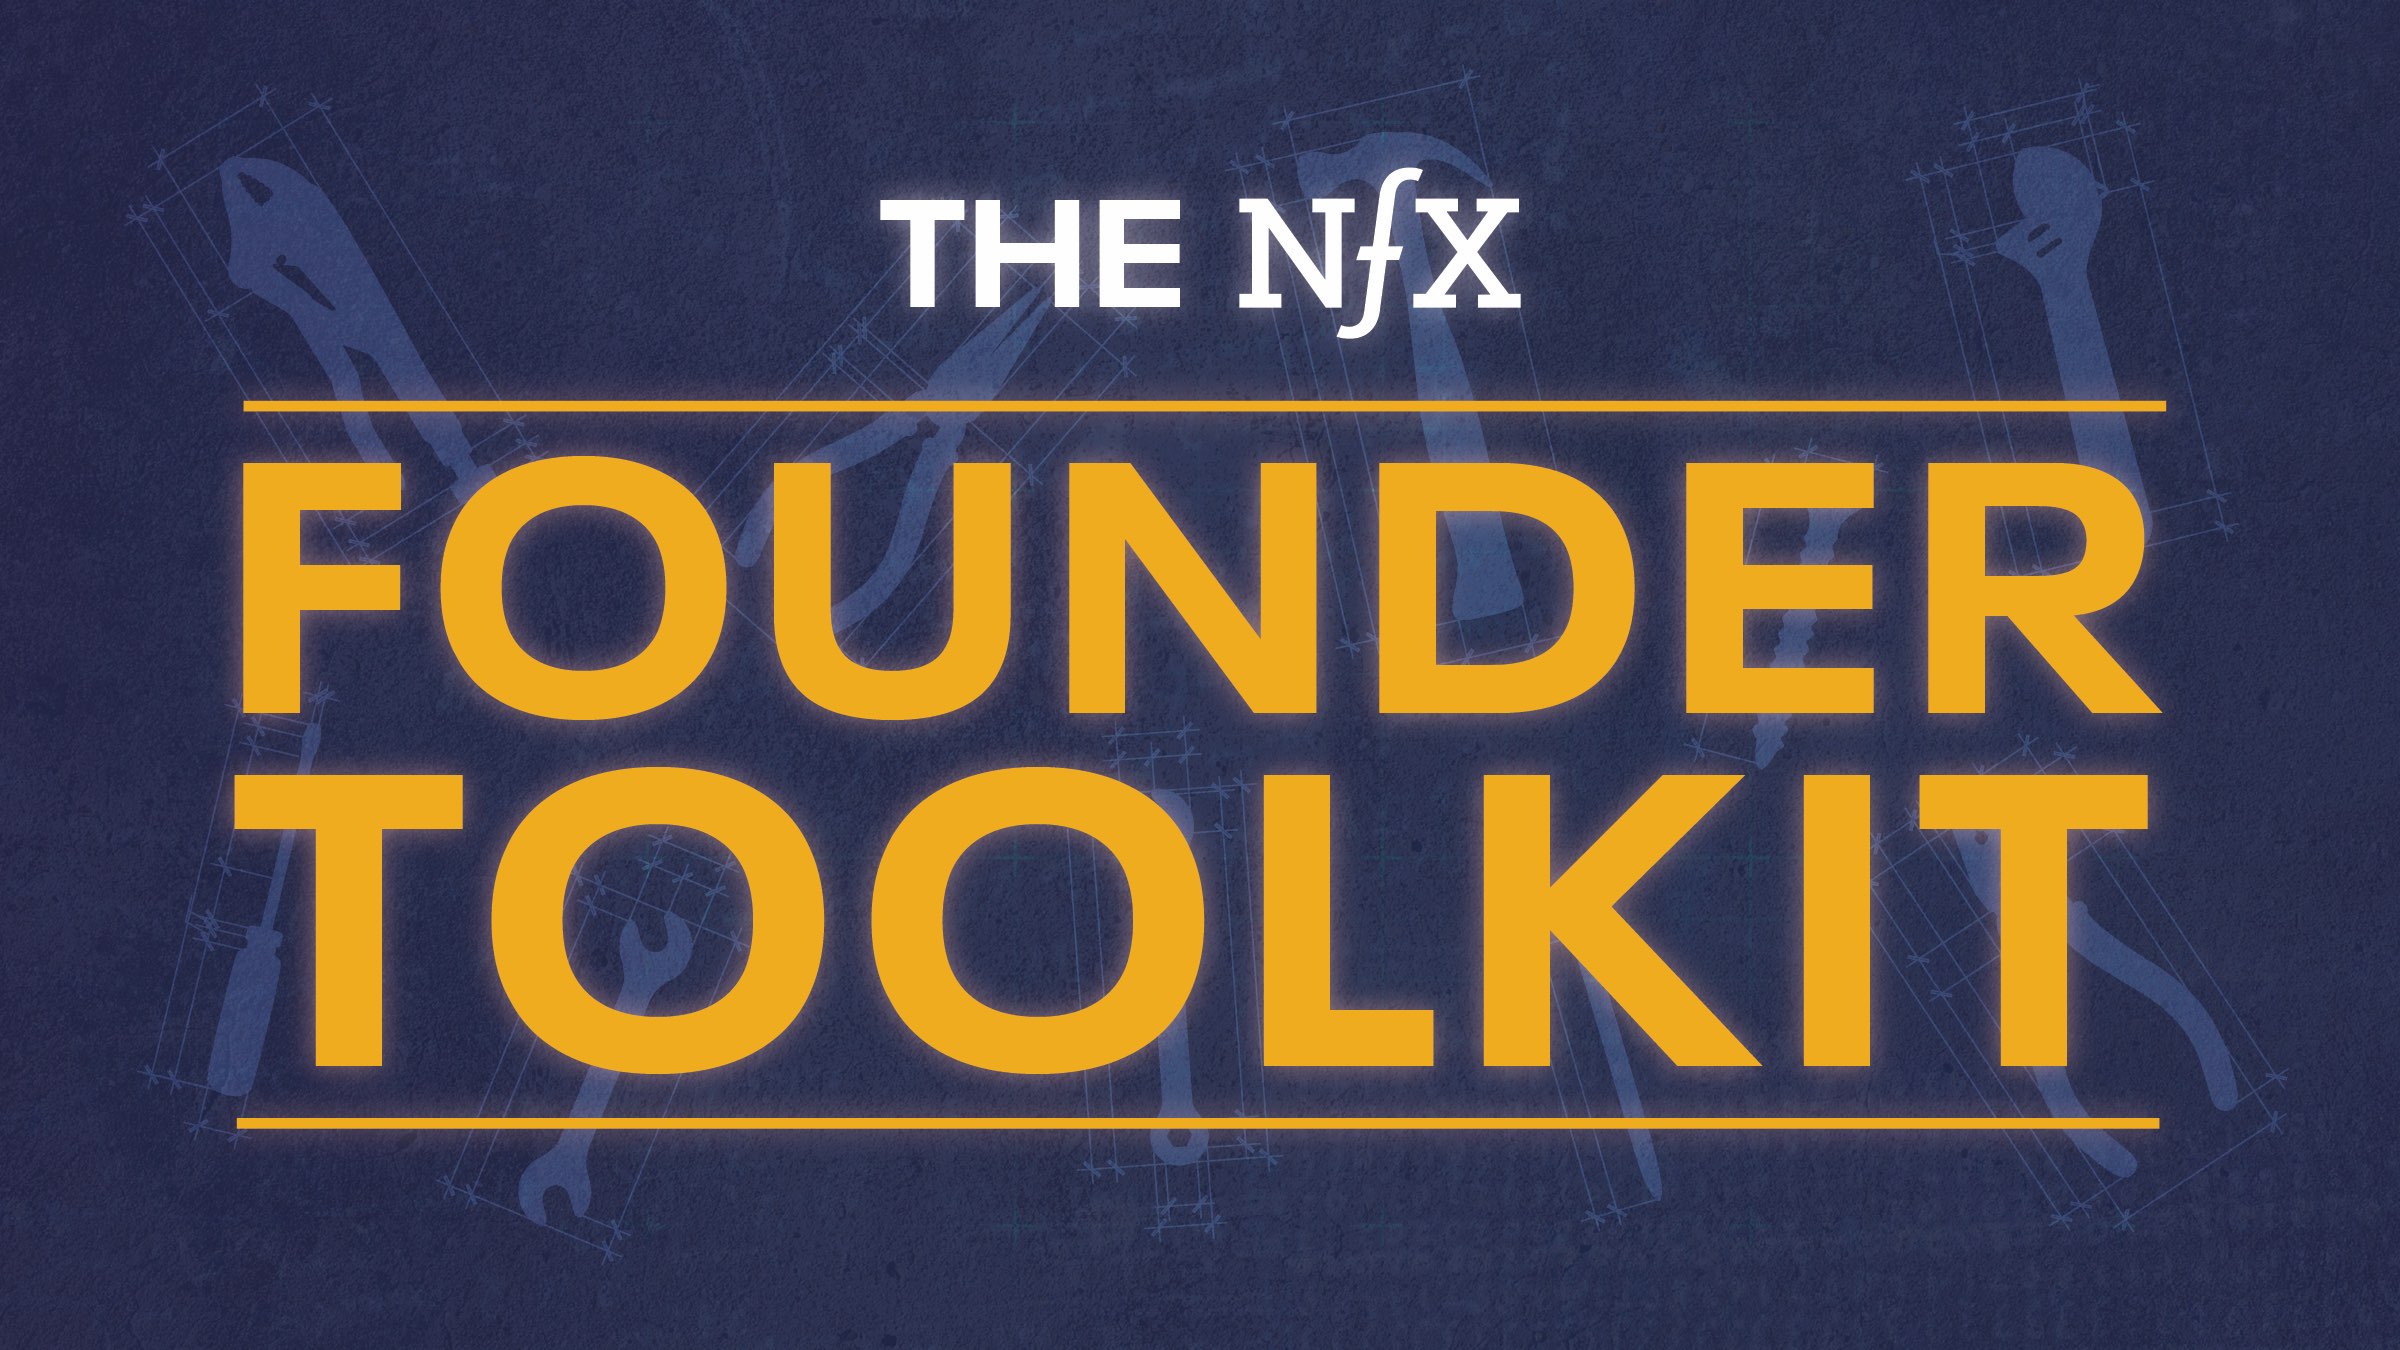 The NFX Founder Toolkit